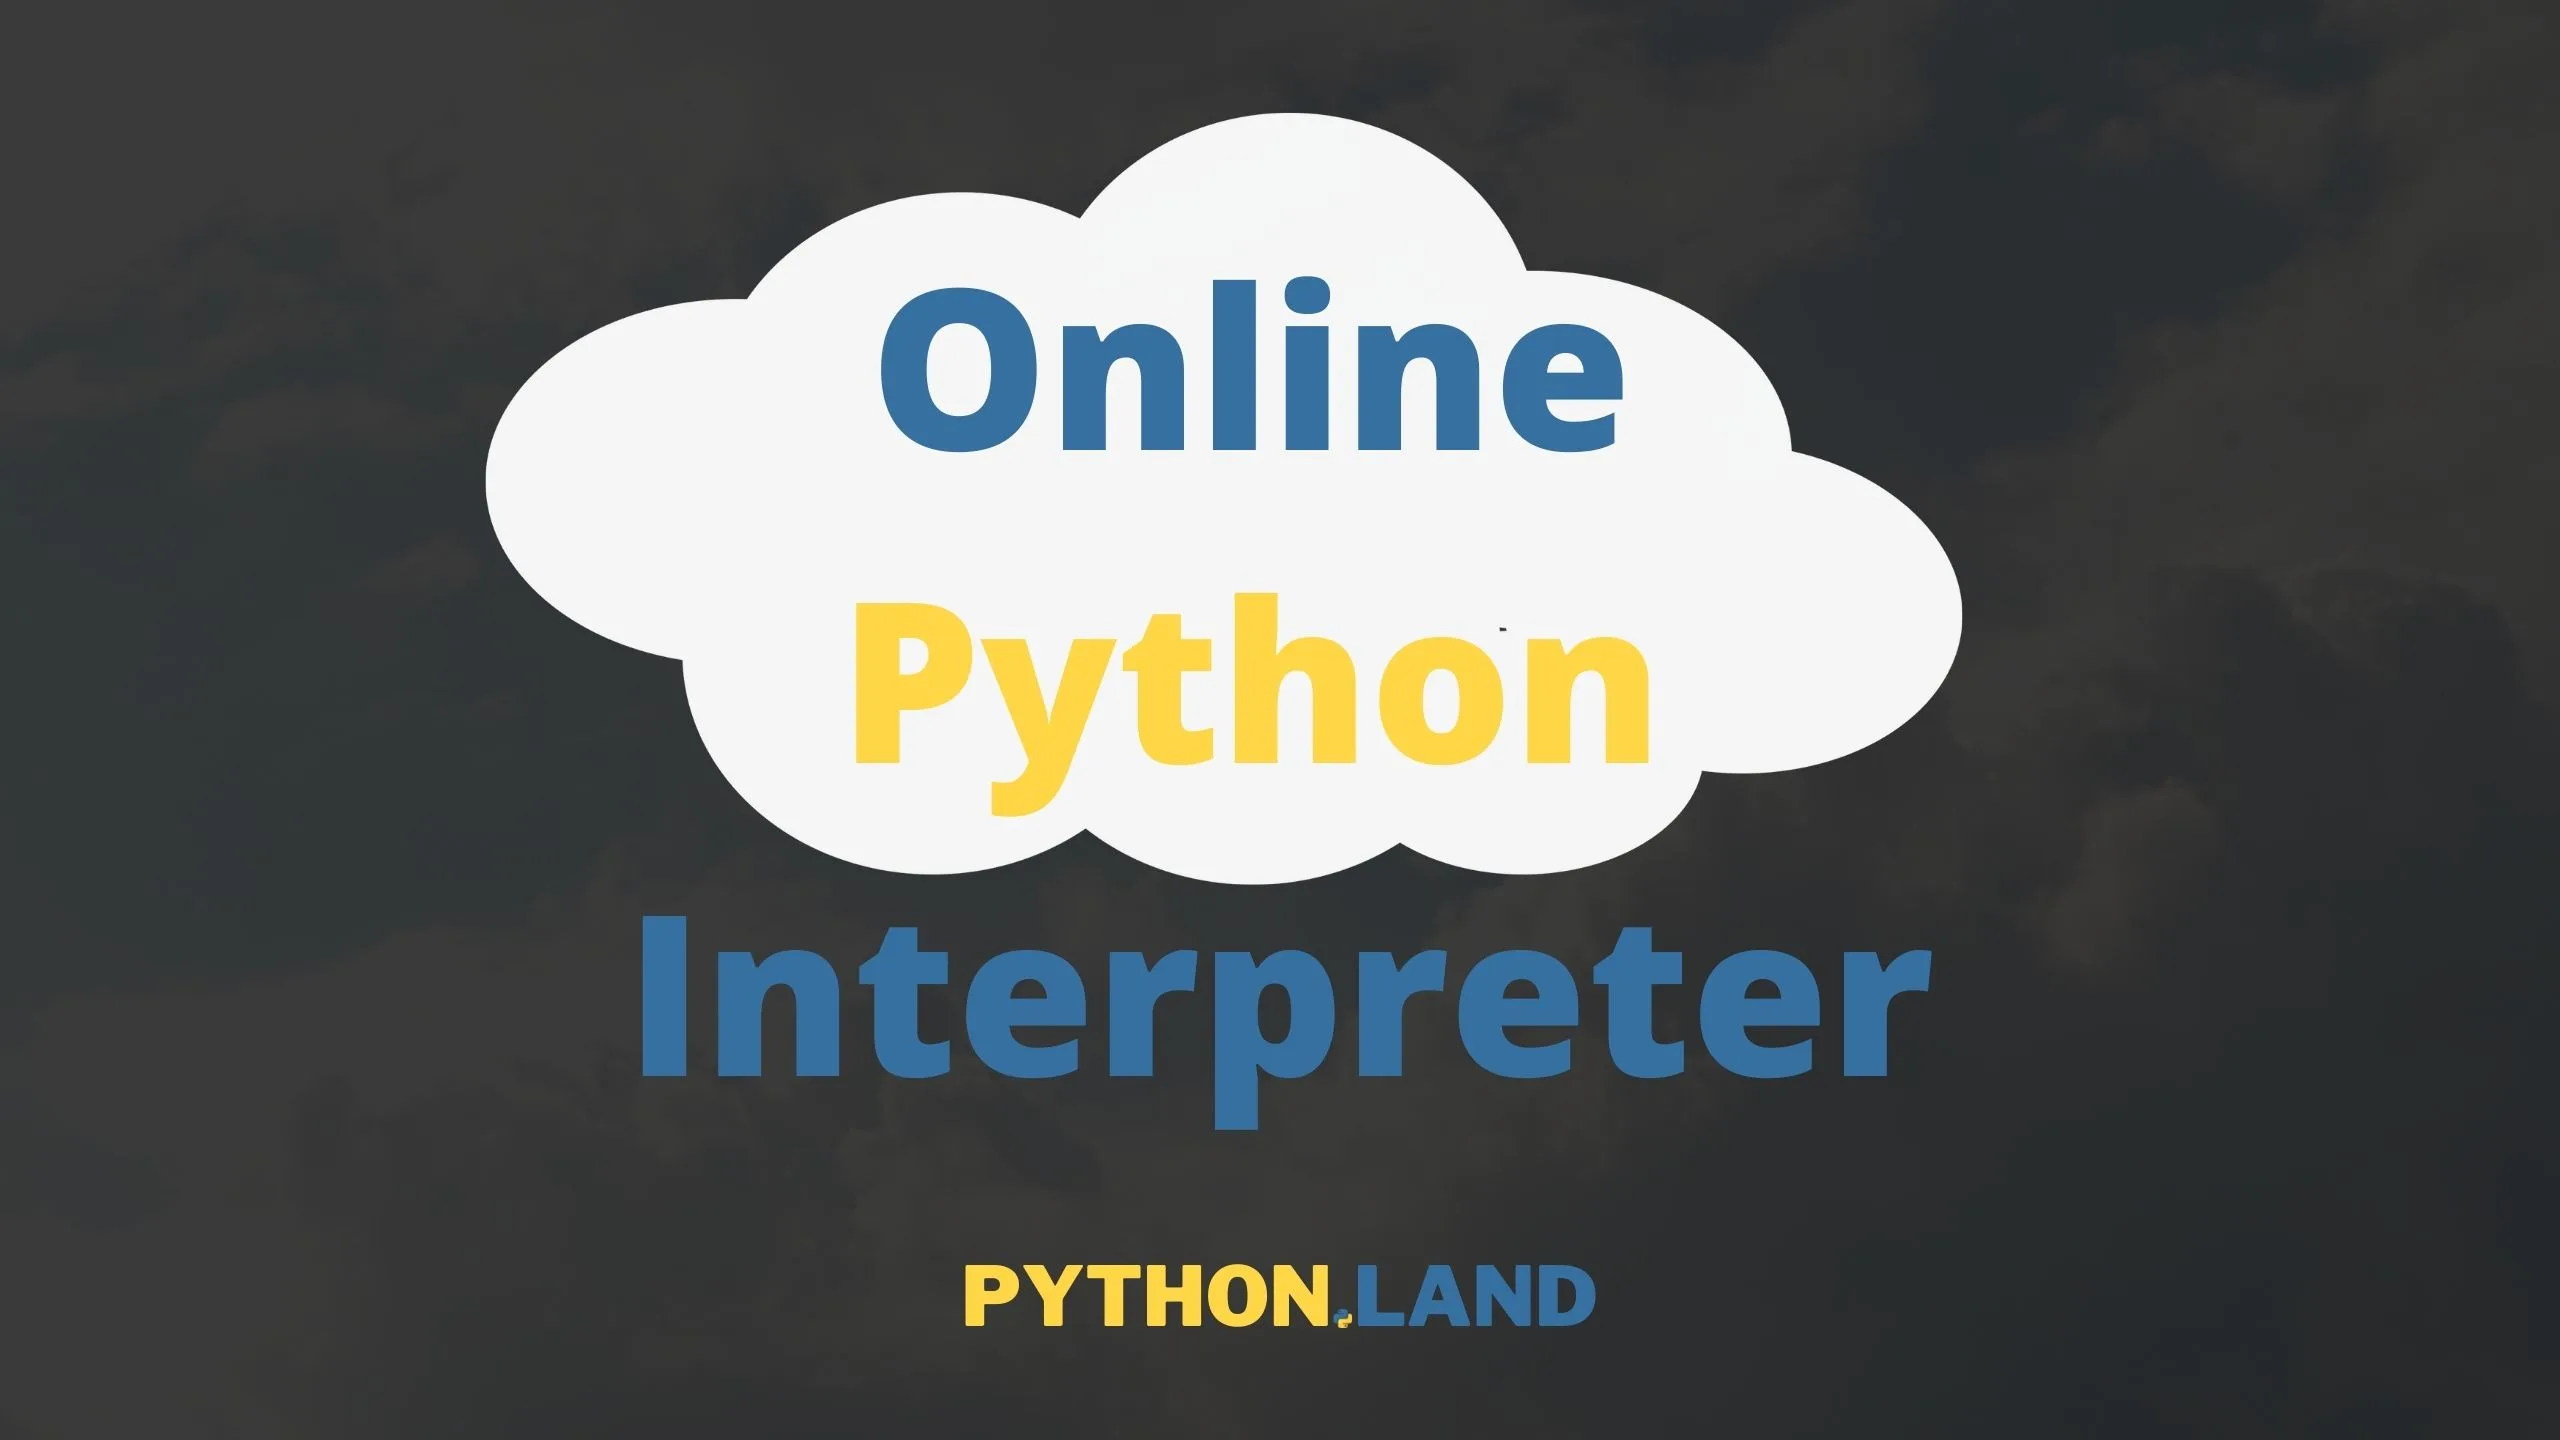 How We Built Our Online Python Compiler